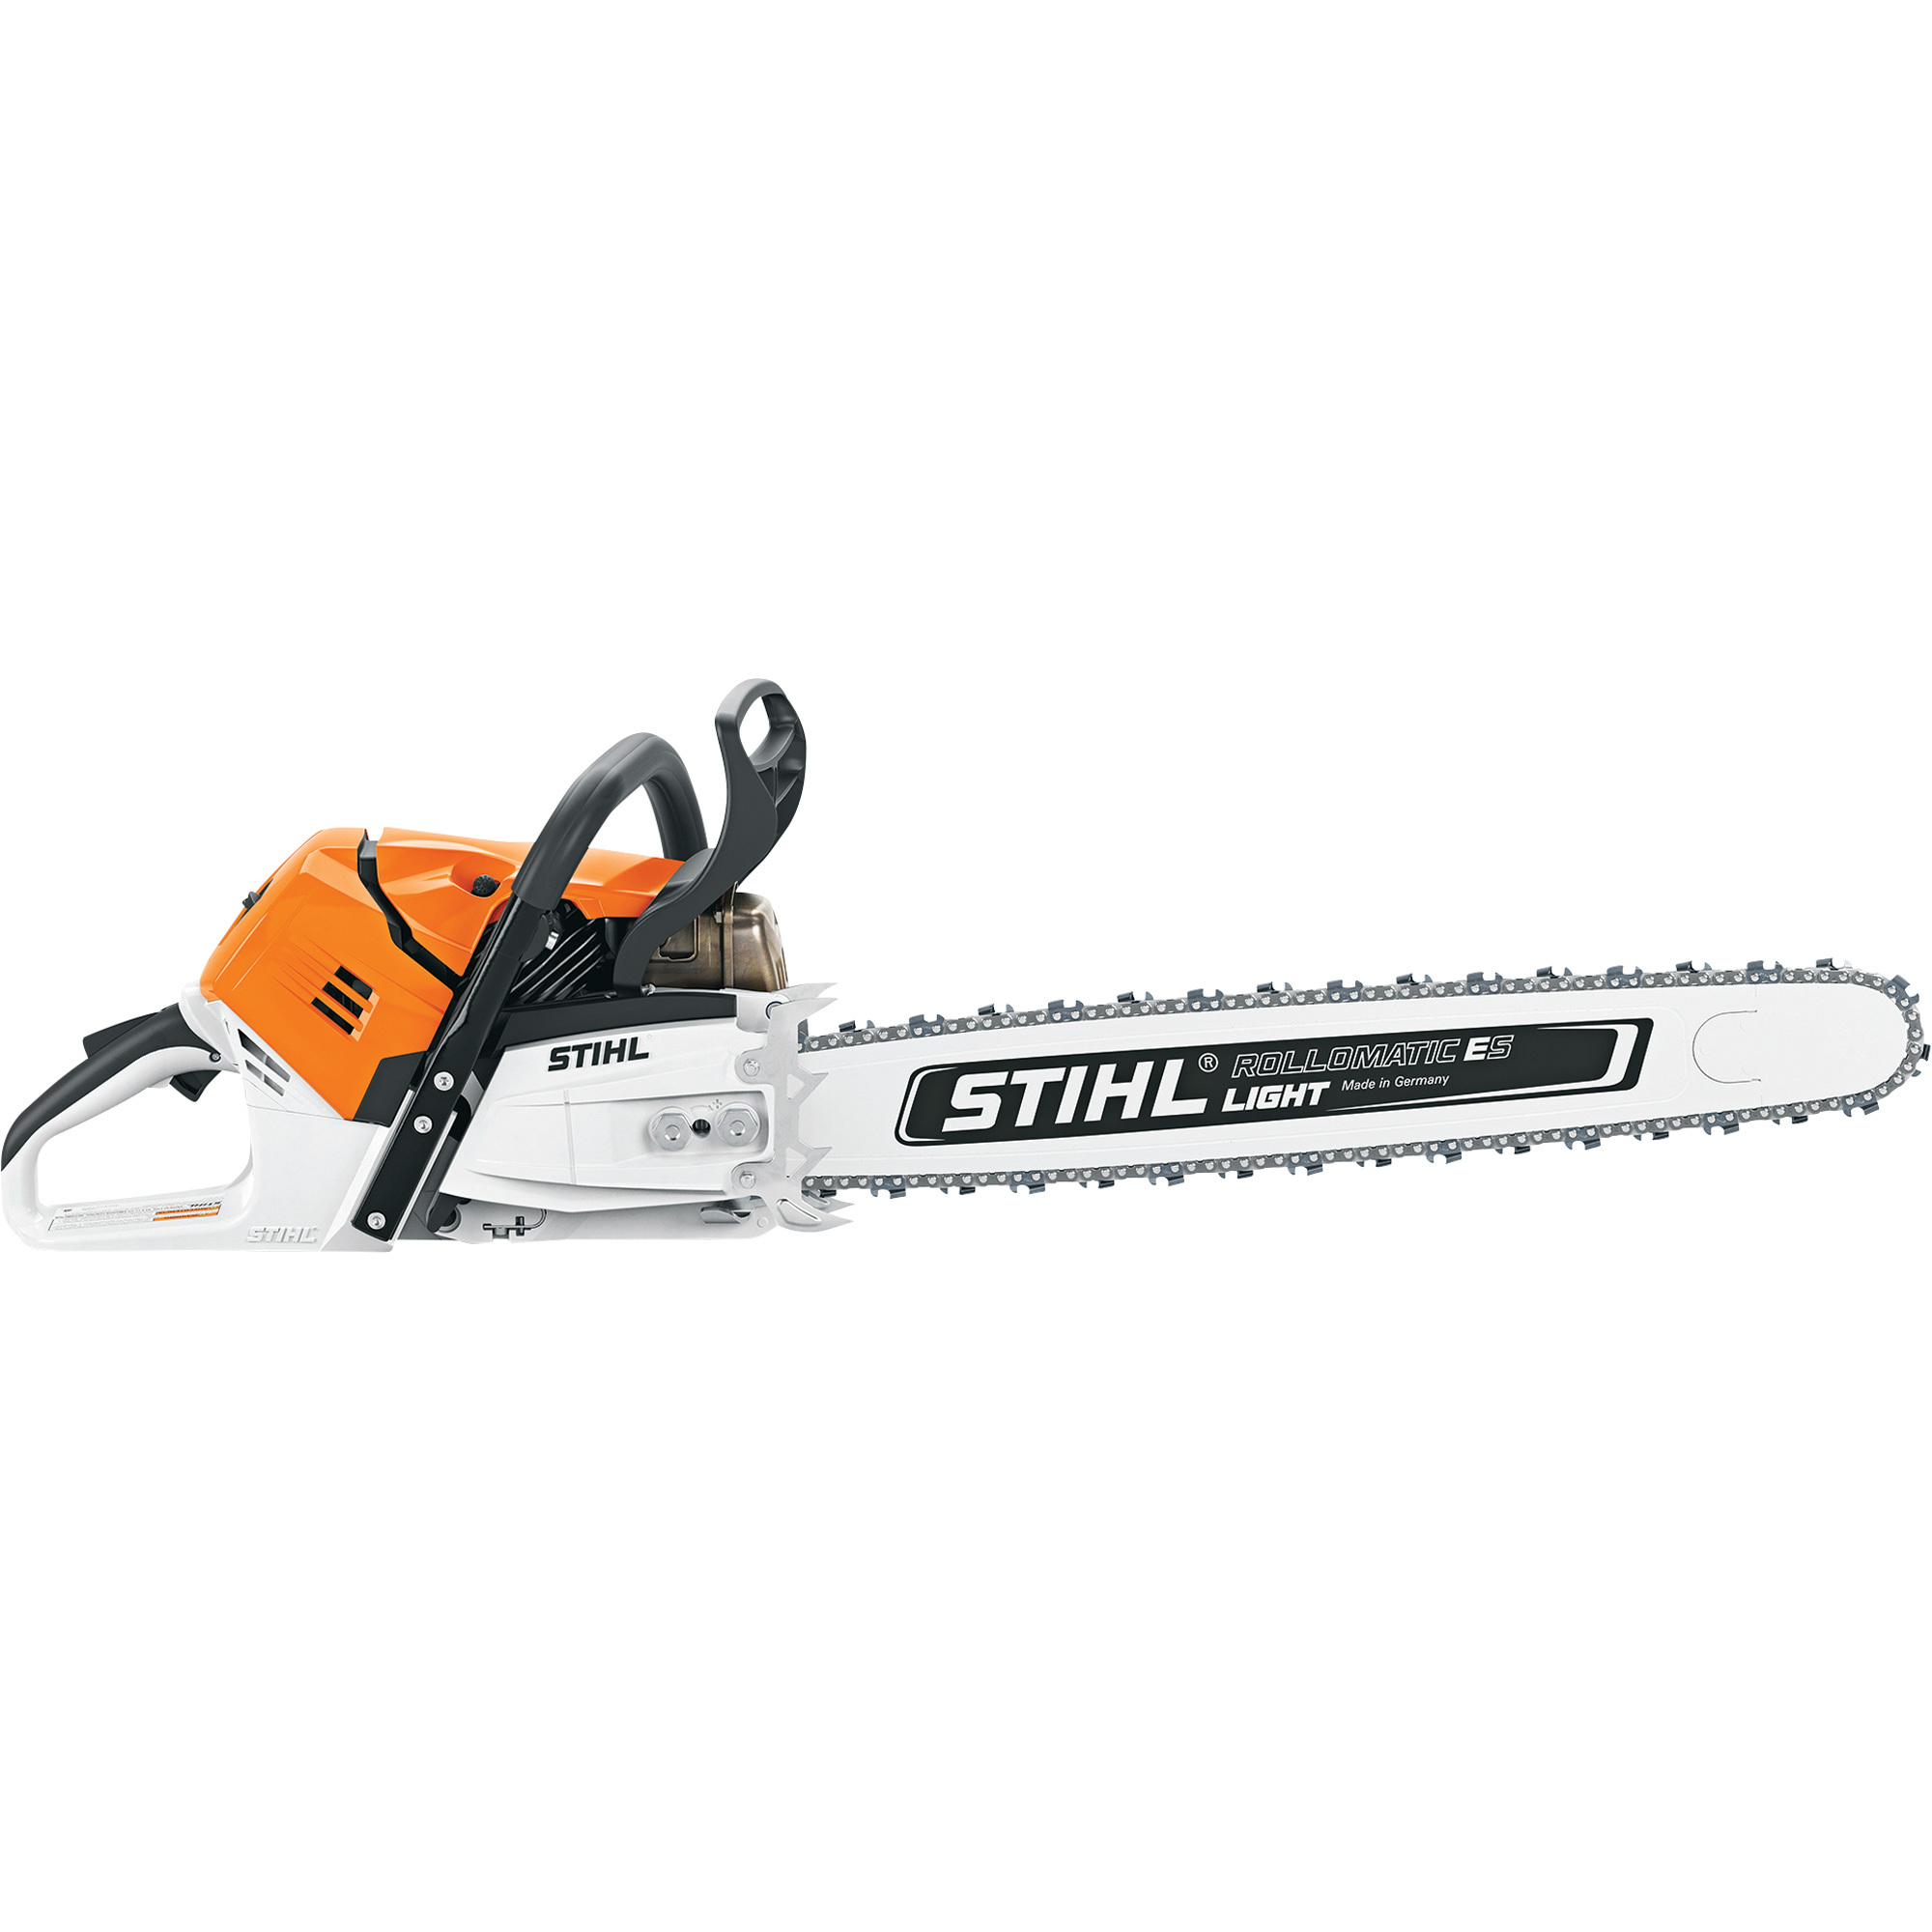 STIHL Gas-Powered Chainsaw with Electronic Fuel Injection â 28Inch Bar, 79.2cc Engine, 3/8Inch Chain Pitch, Model MS 500i